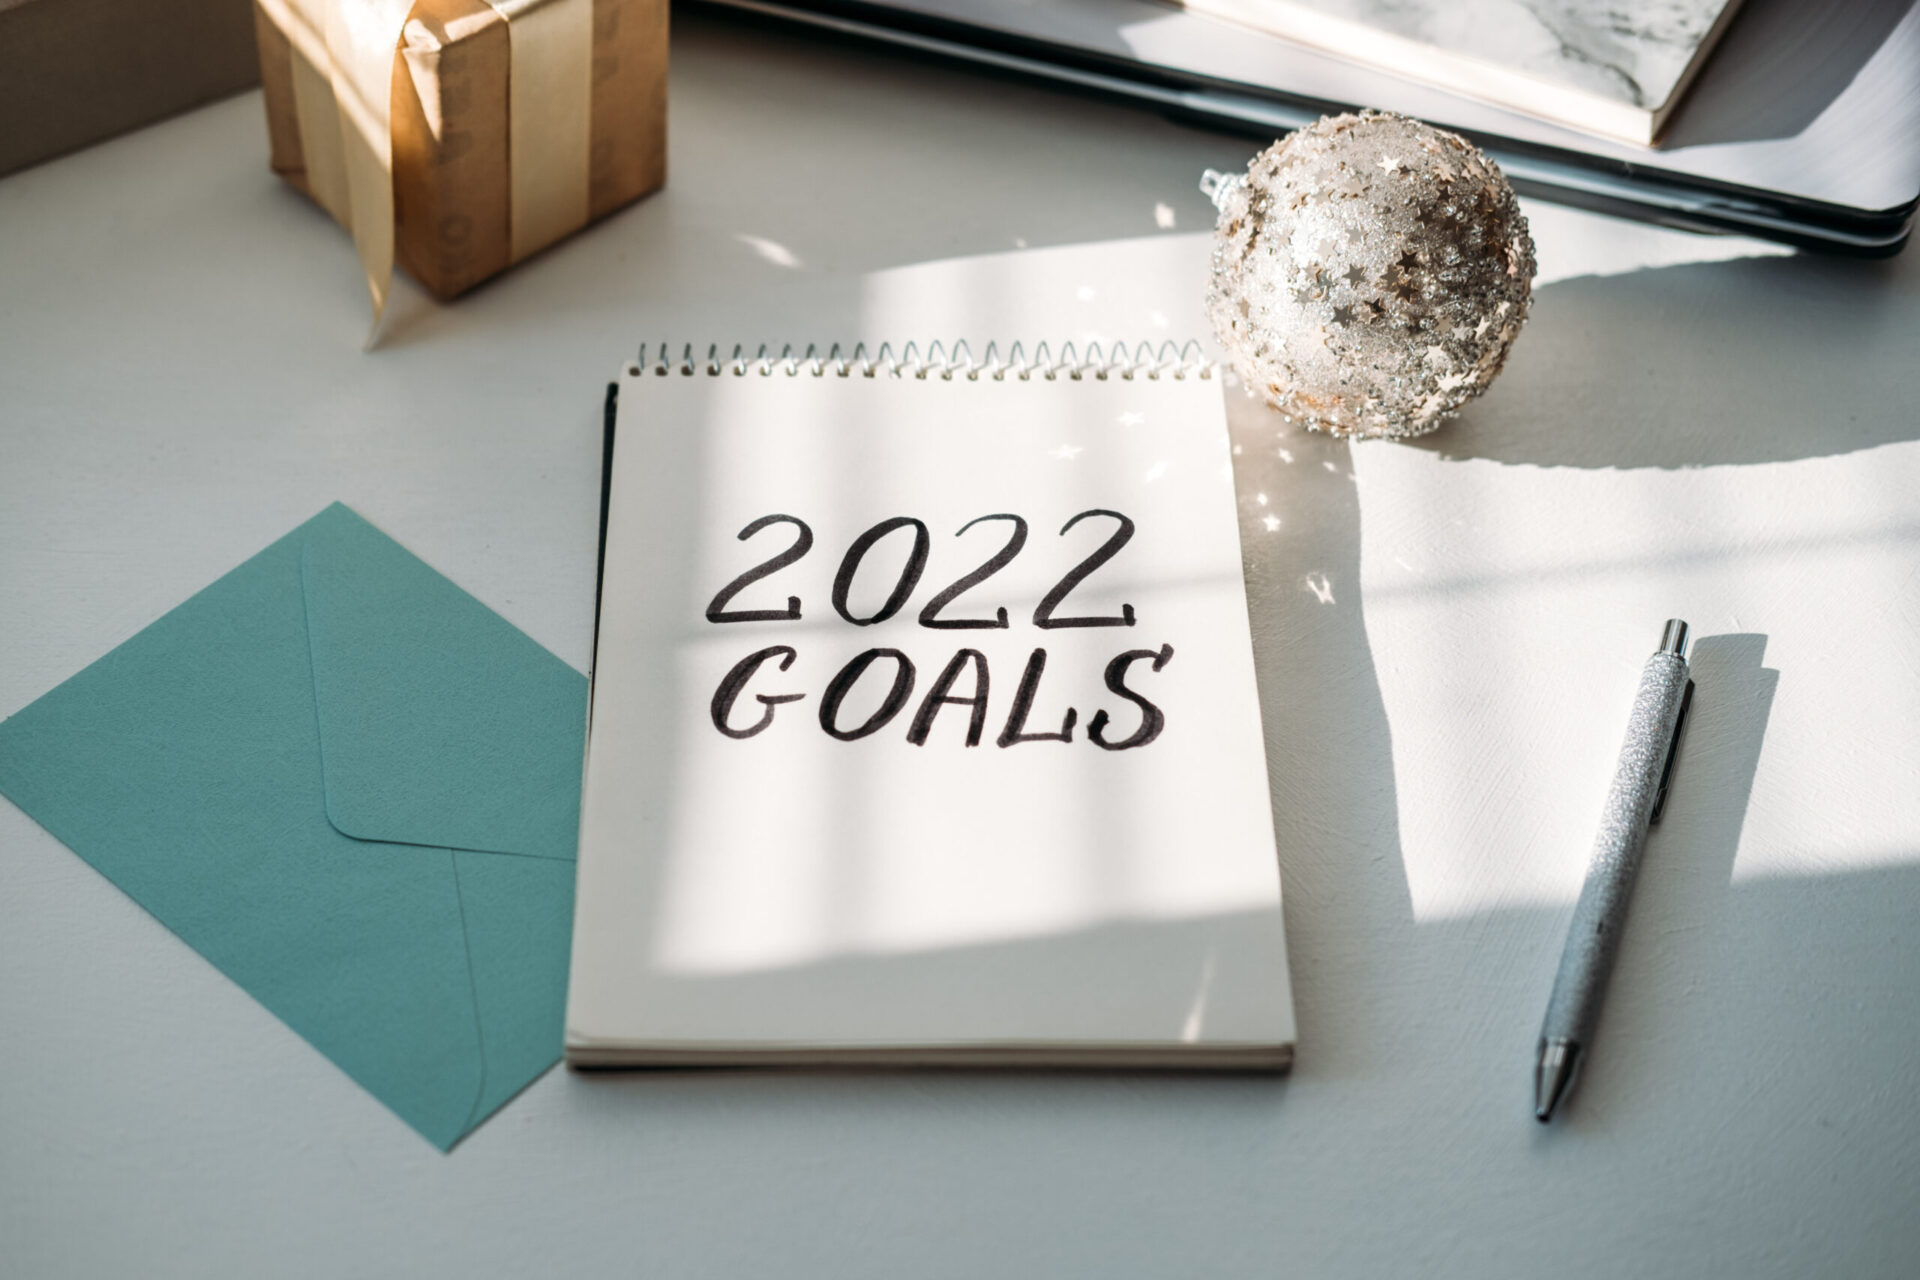 Three New Financial Goals for 2022!